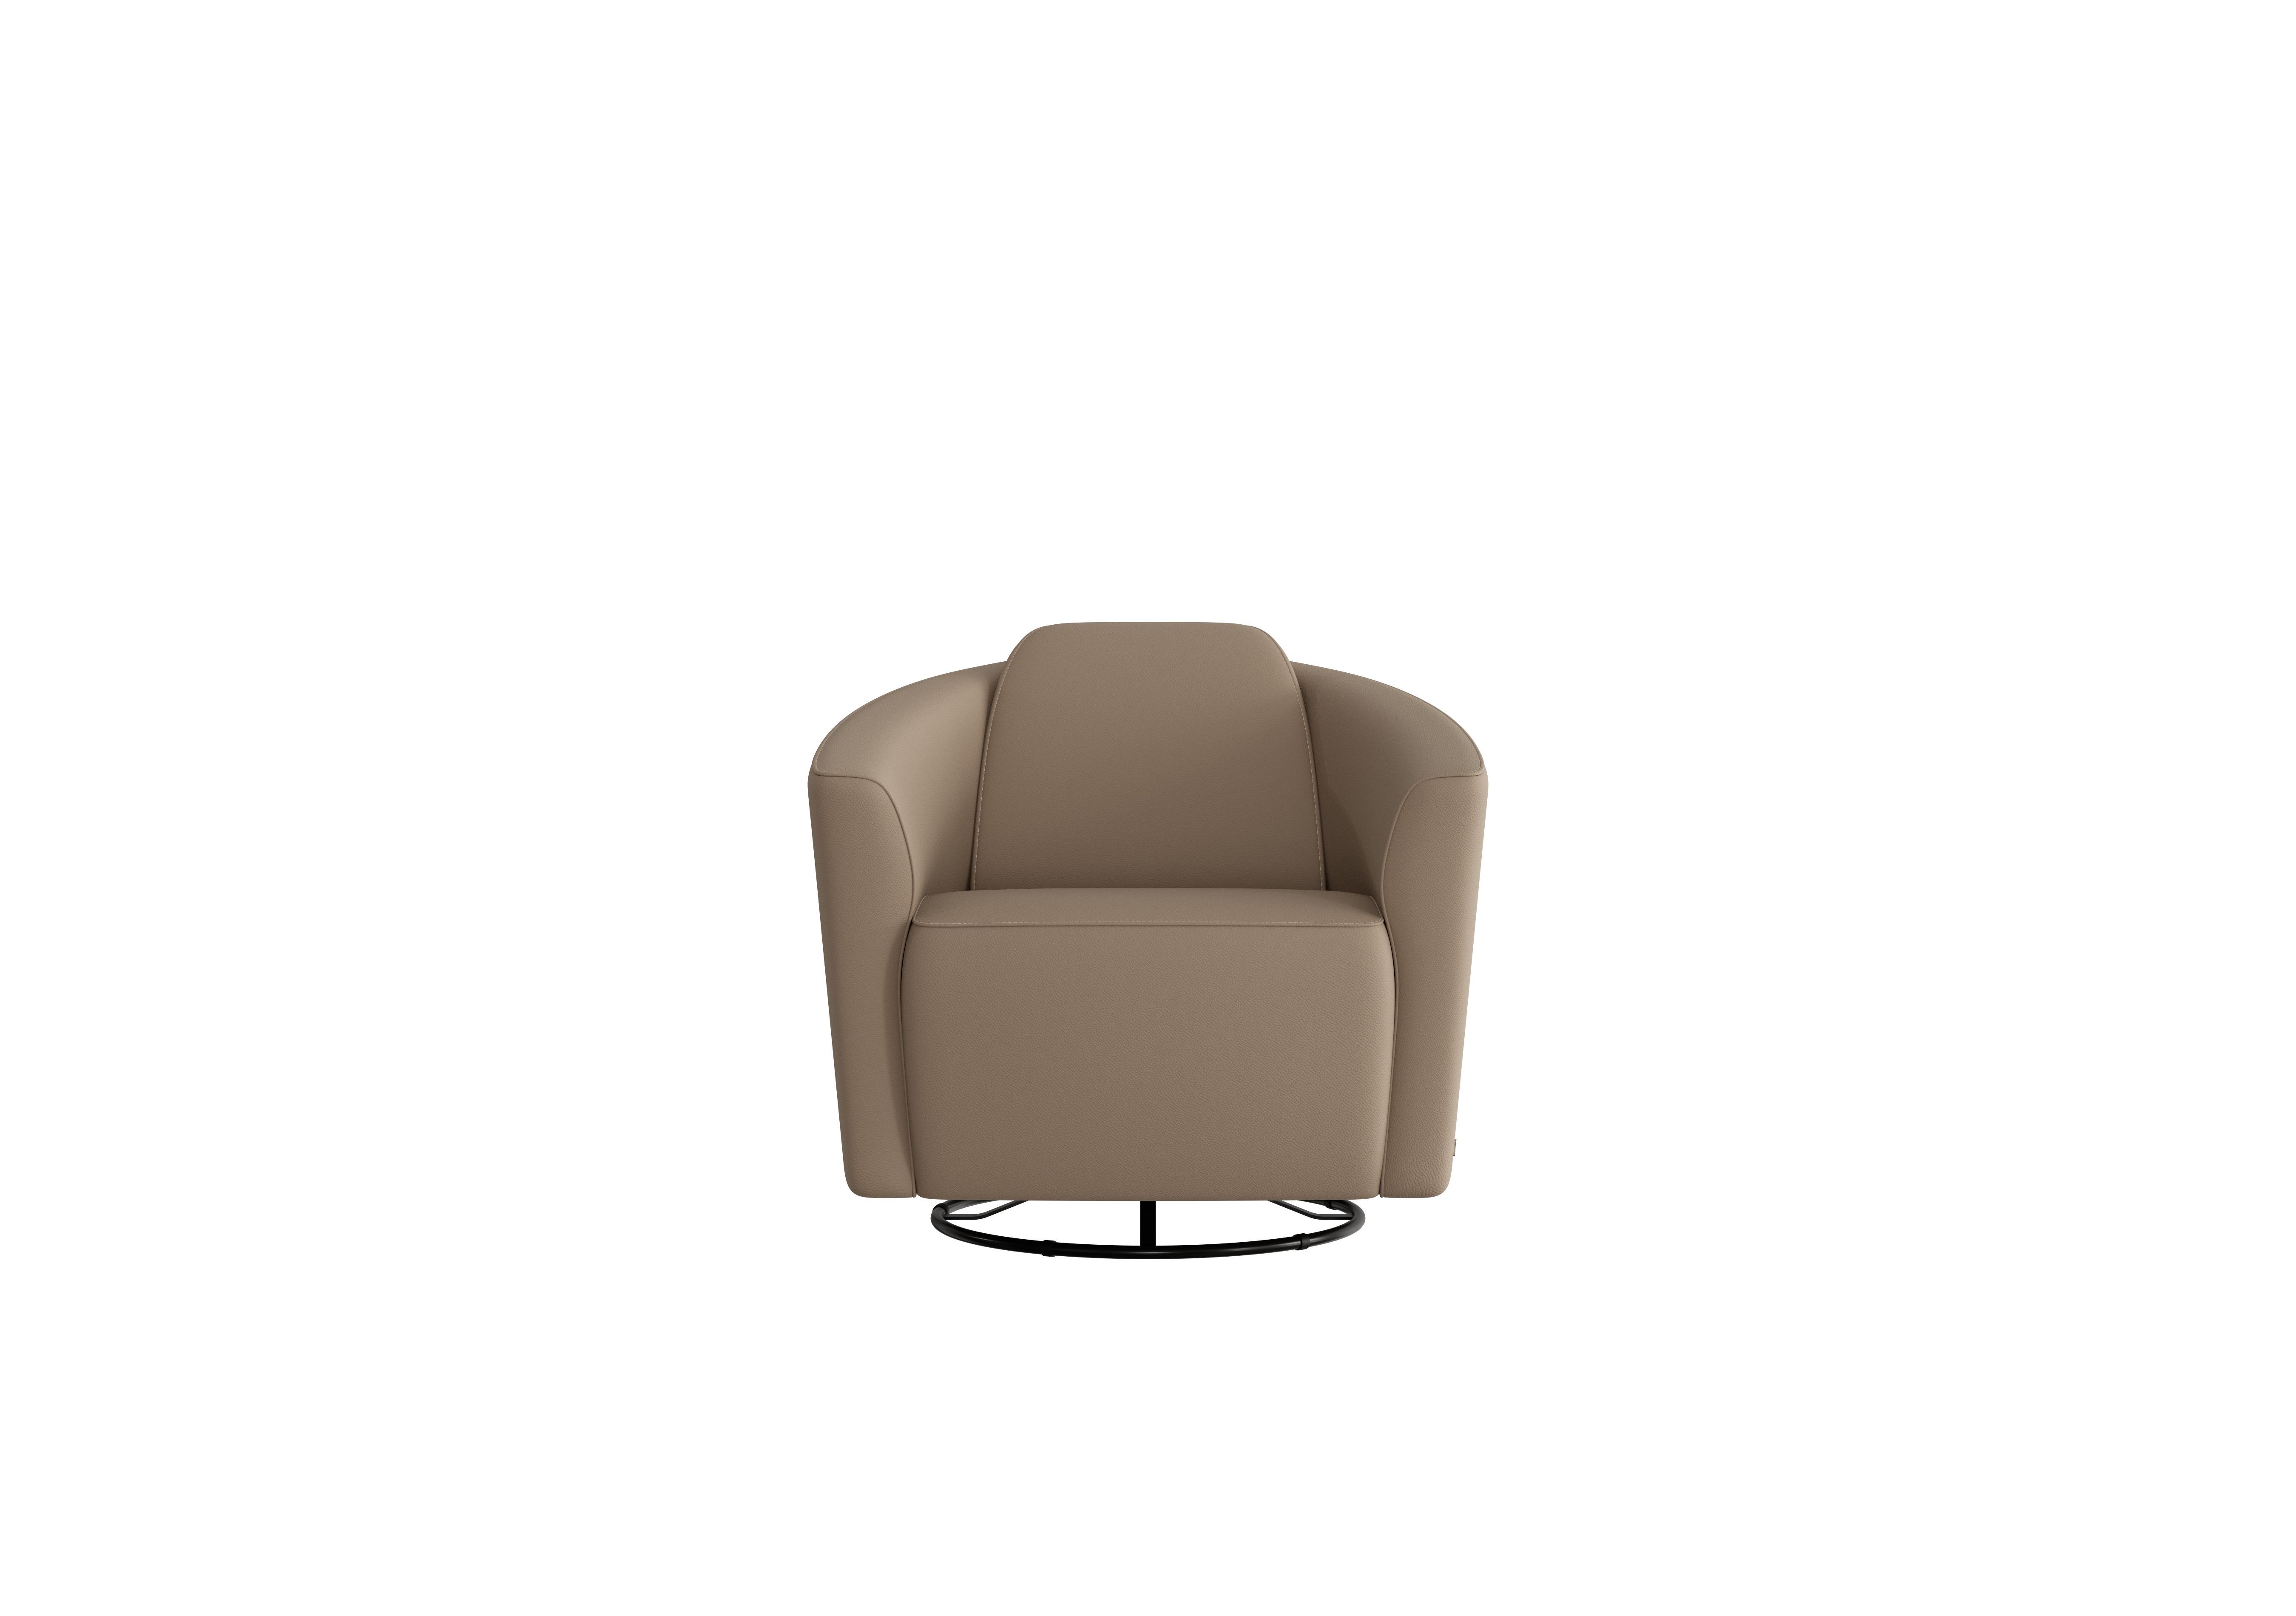 Ketty Leather Swivel Chair in Torello Taupe 312 on Furniture Village